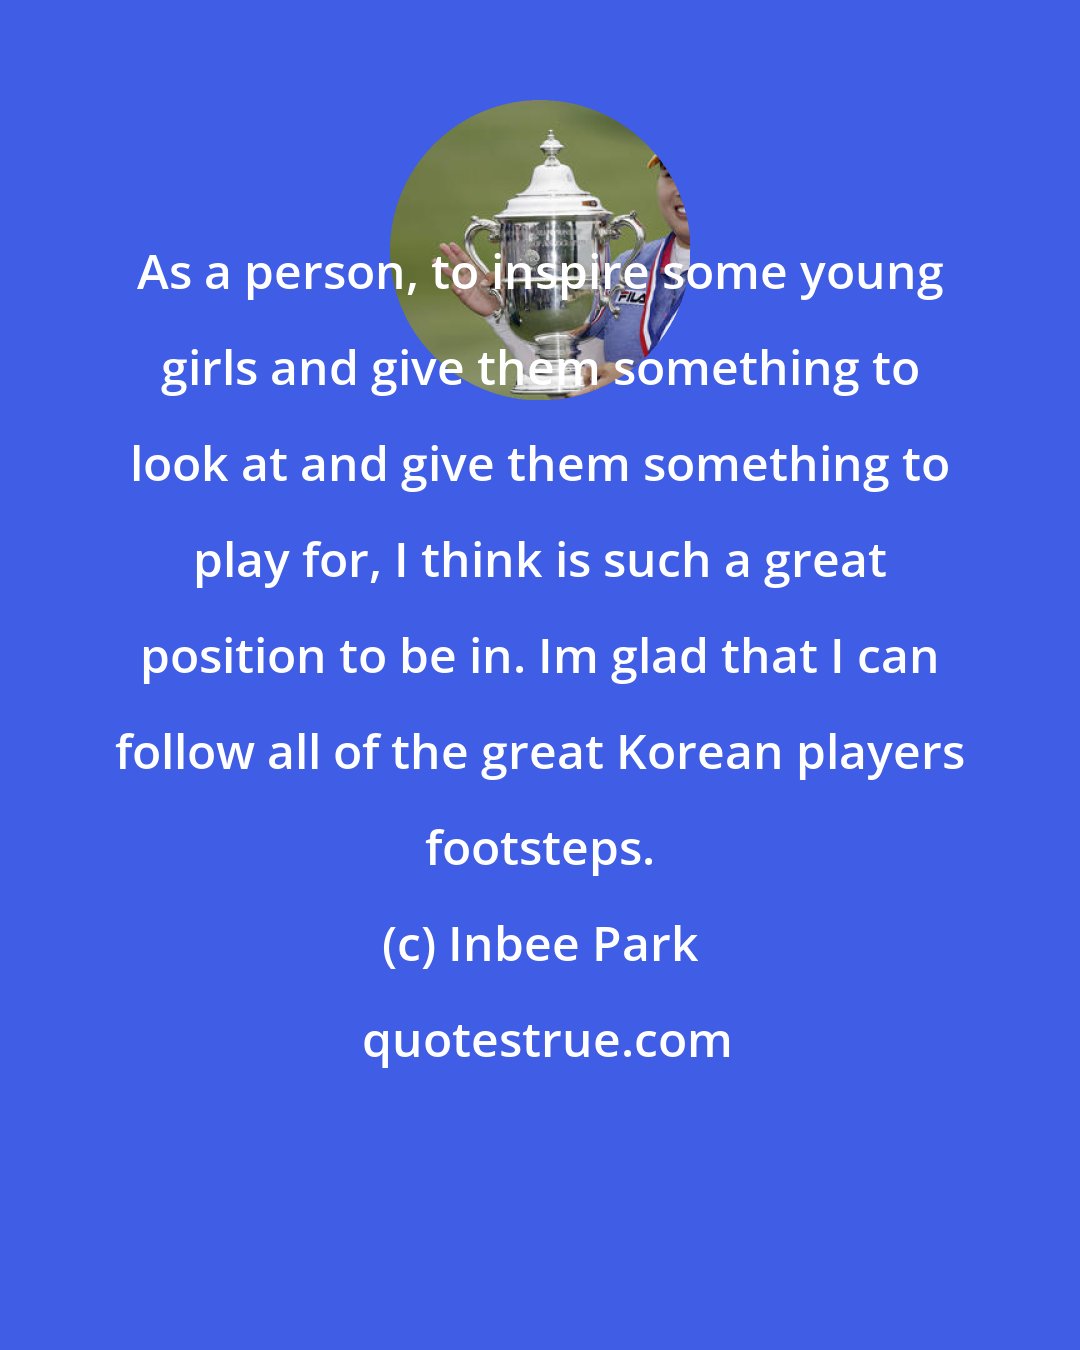 Inbee Park: As a person, to inspire some young girls and give them something to look at and give them something to play for, I think is such a great position to be in. Im glad that I can follow all of the great Korean players footsteps.